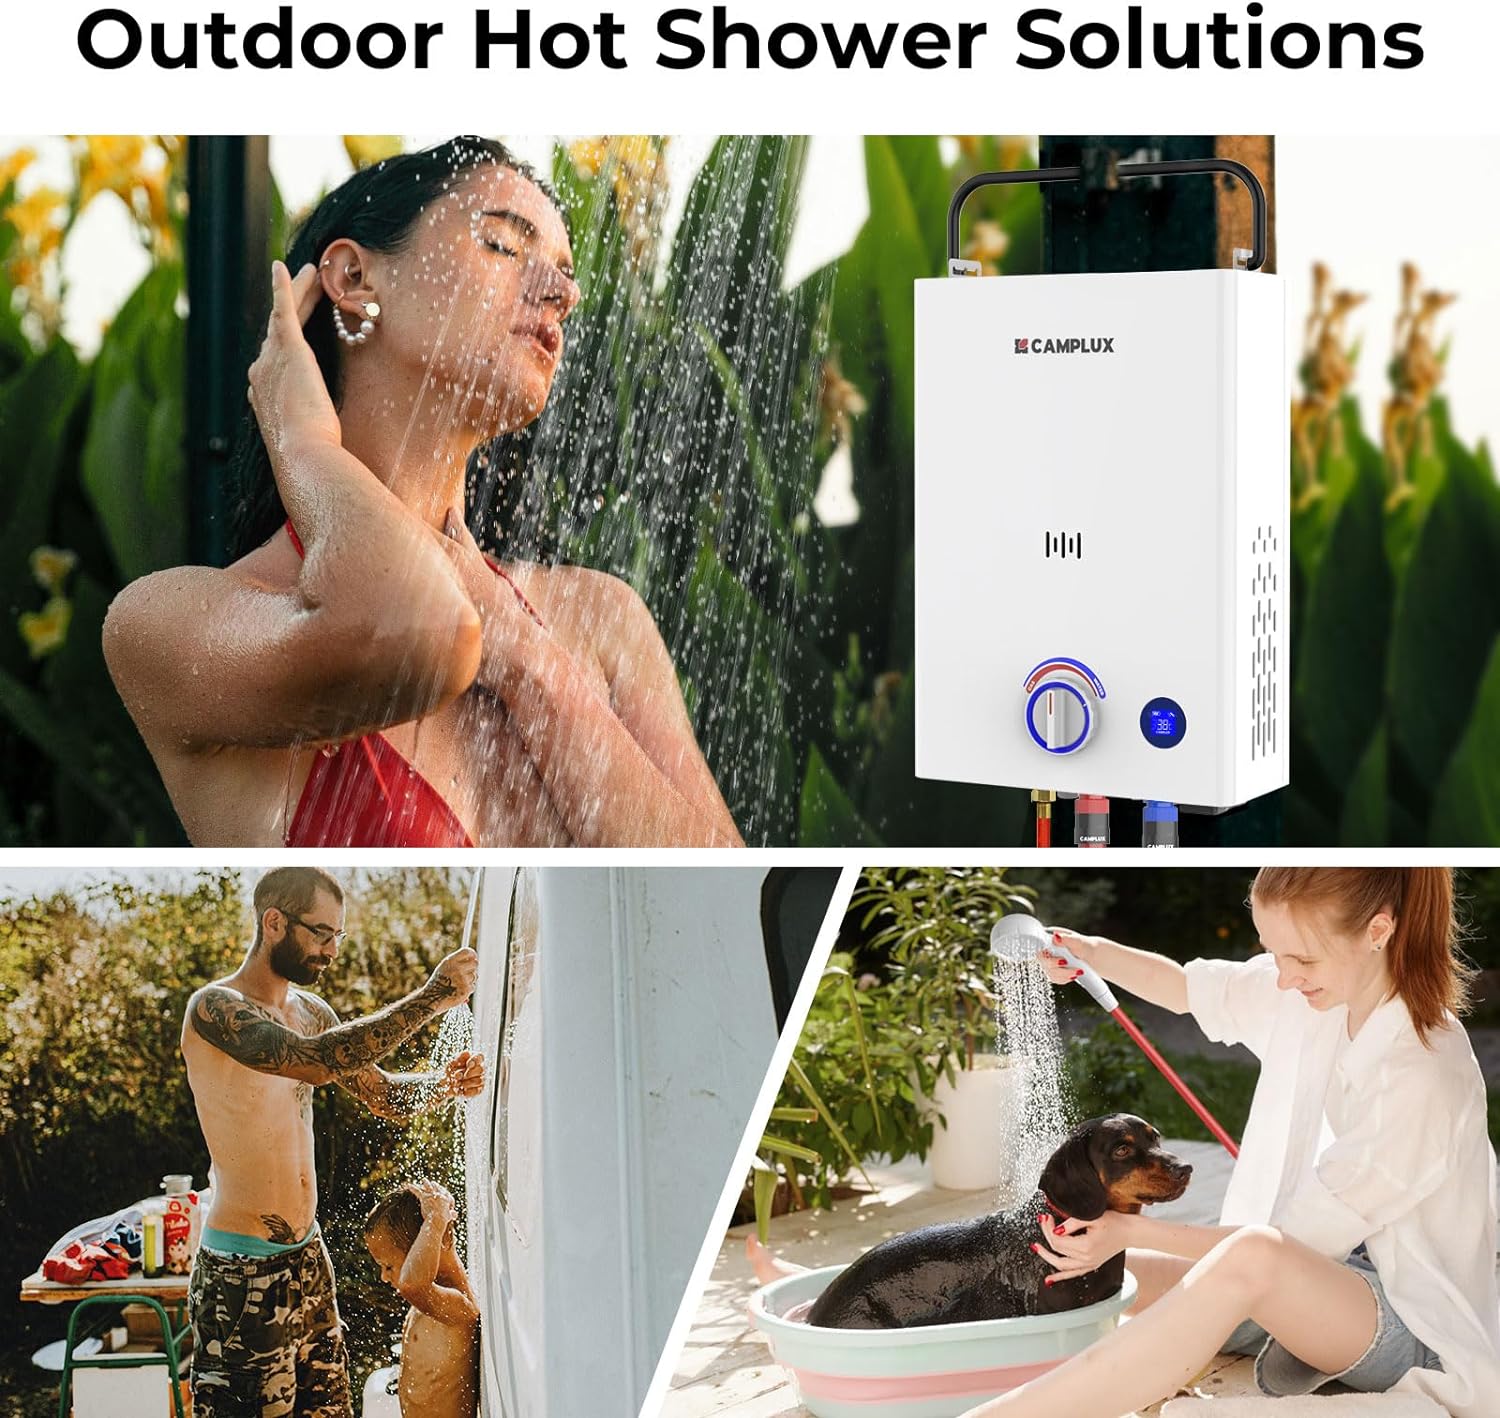 CAMPLUX Gas Water Heater 10 litres with Adjustable Handle F10, Portable Outdoor LPG Shower, Butane (28-30 mbar)/ Propane (37 mbar), for Camping/RV Trip/Barn, First Series